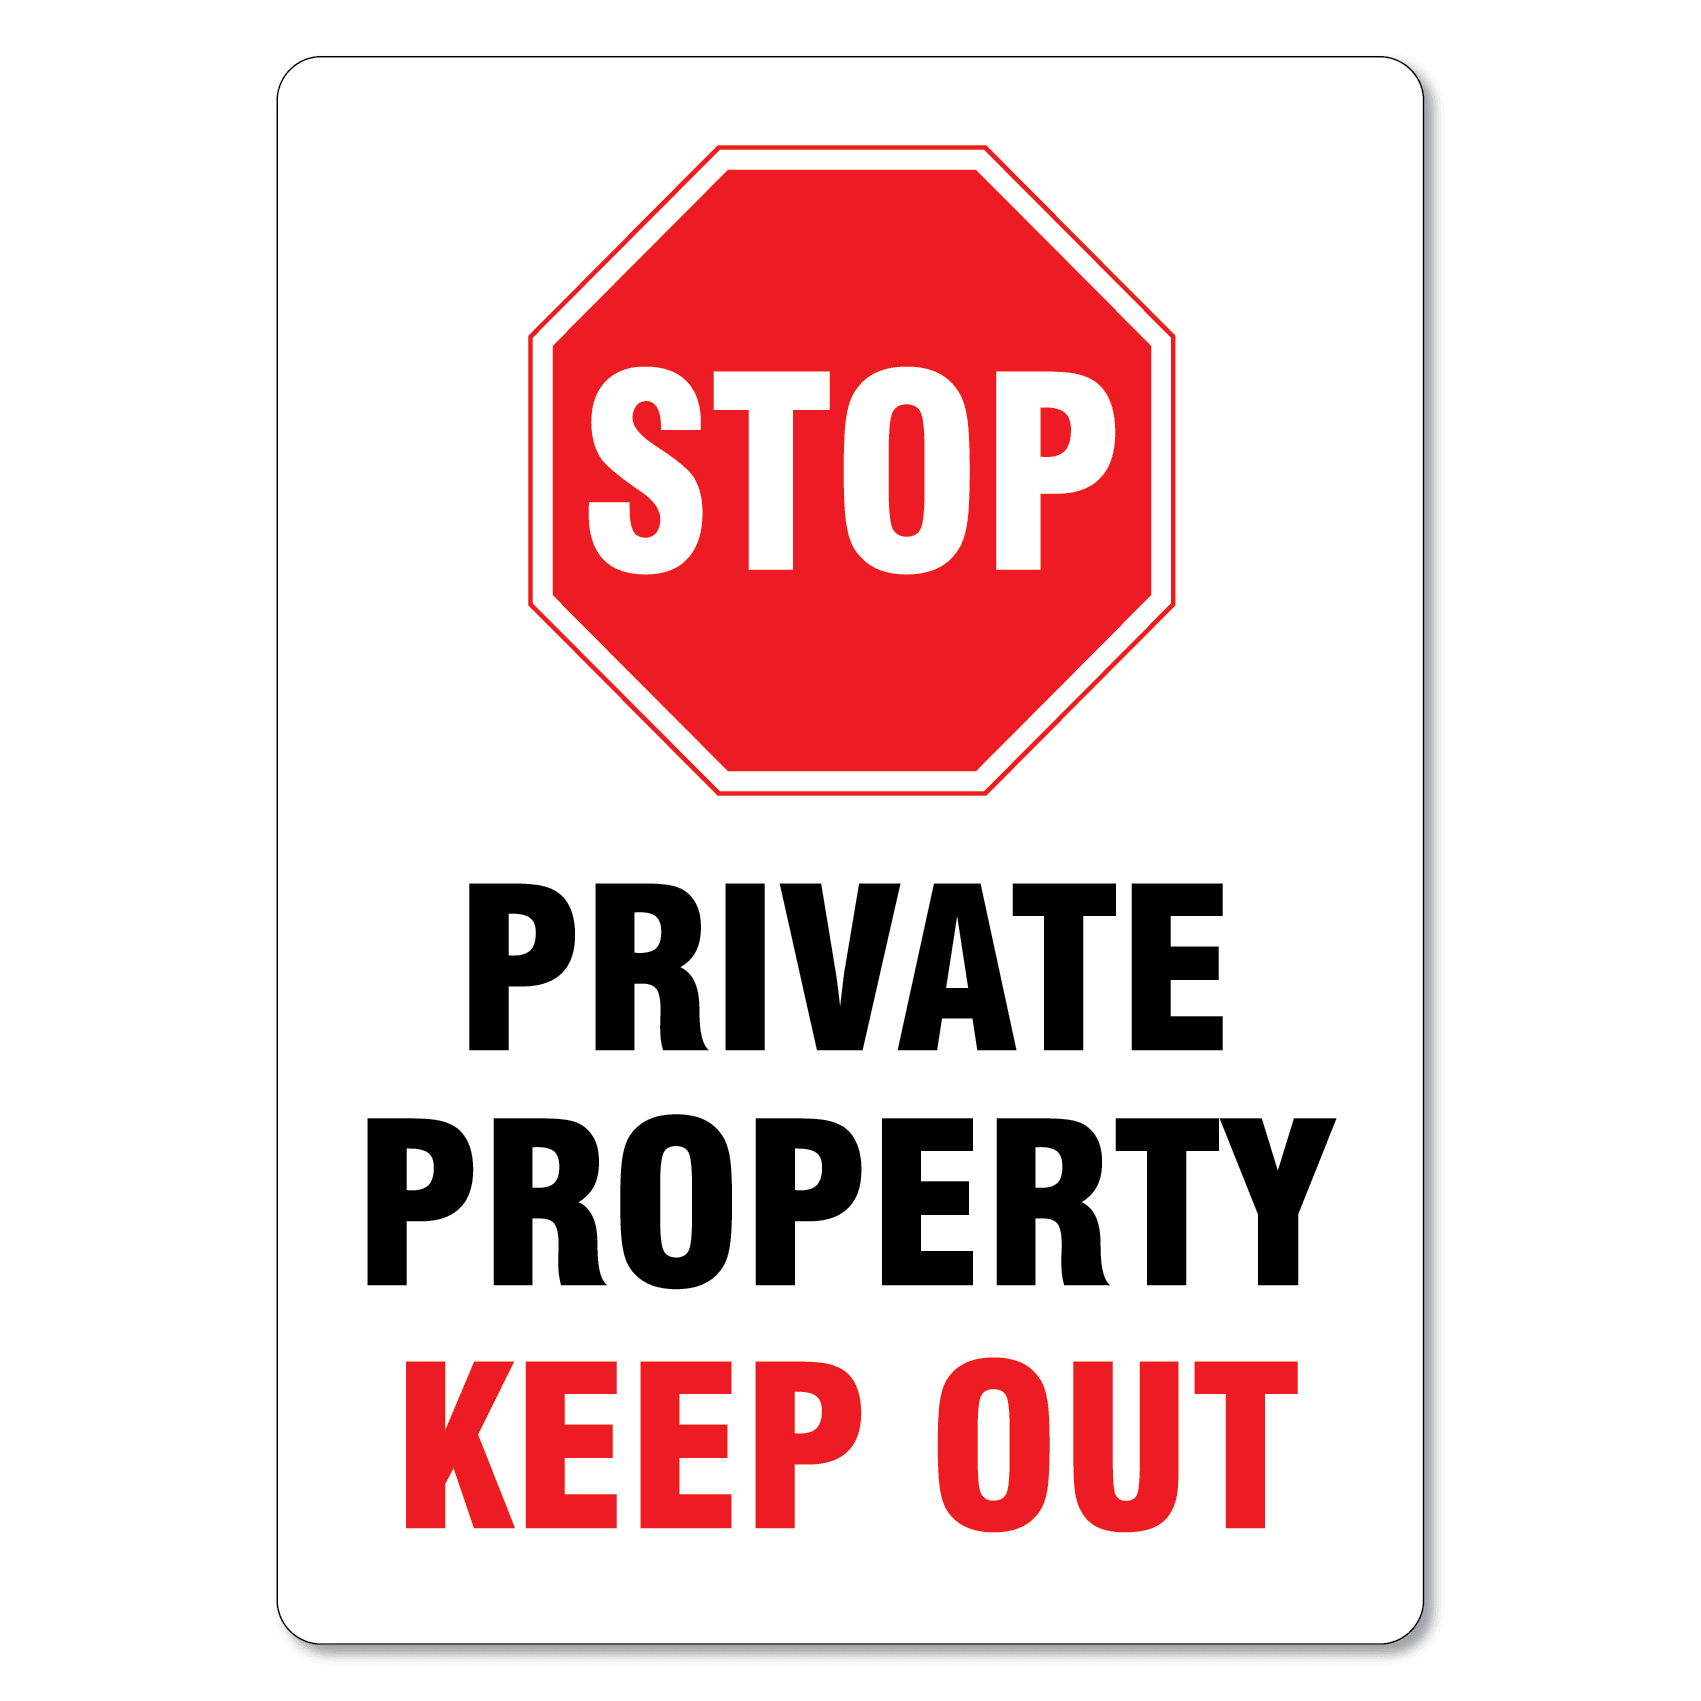 Private property keep out. Keep out private property sign. No property. Private property. Out private